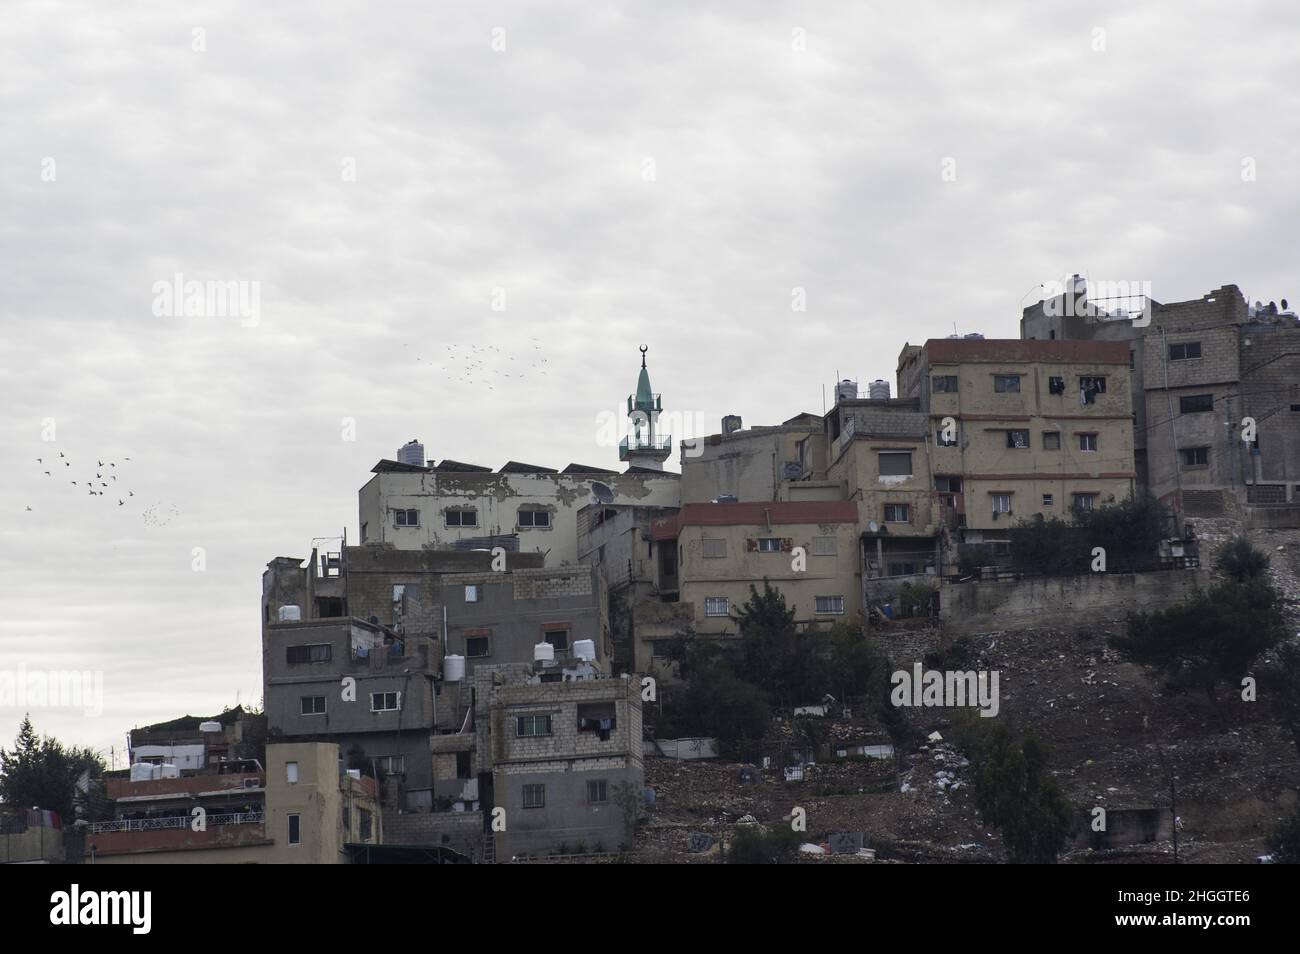 View of Amman Jordan cityscape landscape with buildings and trees on a hill in a densely populated area and a mosque in view. Stock Photo